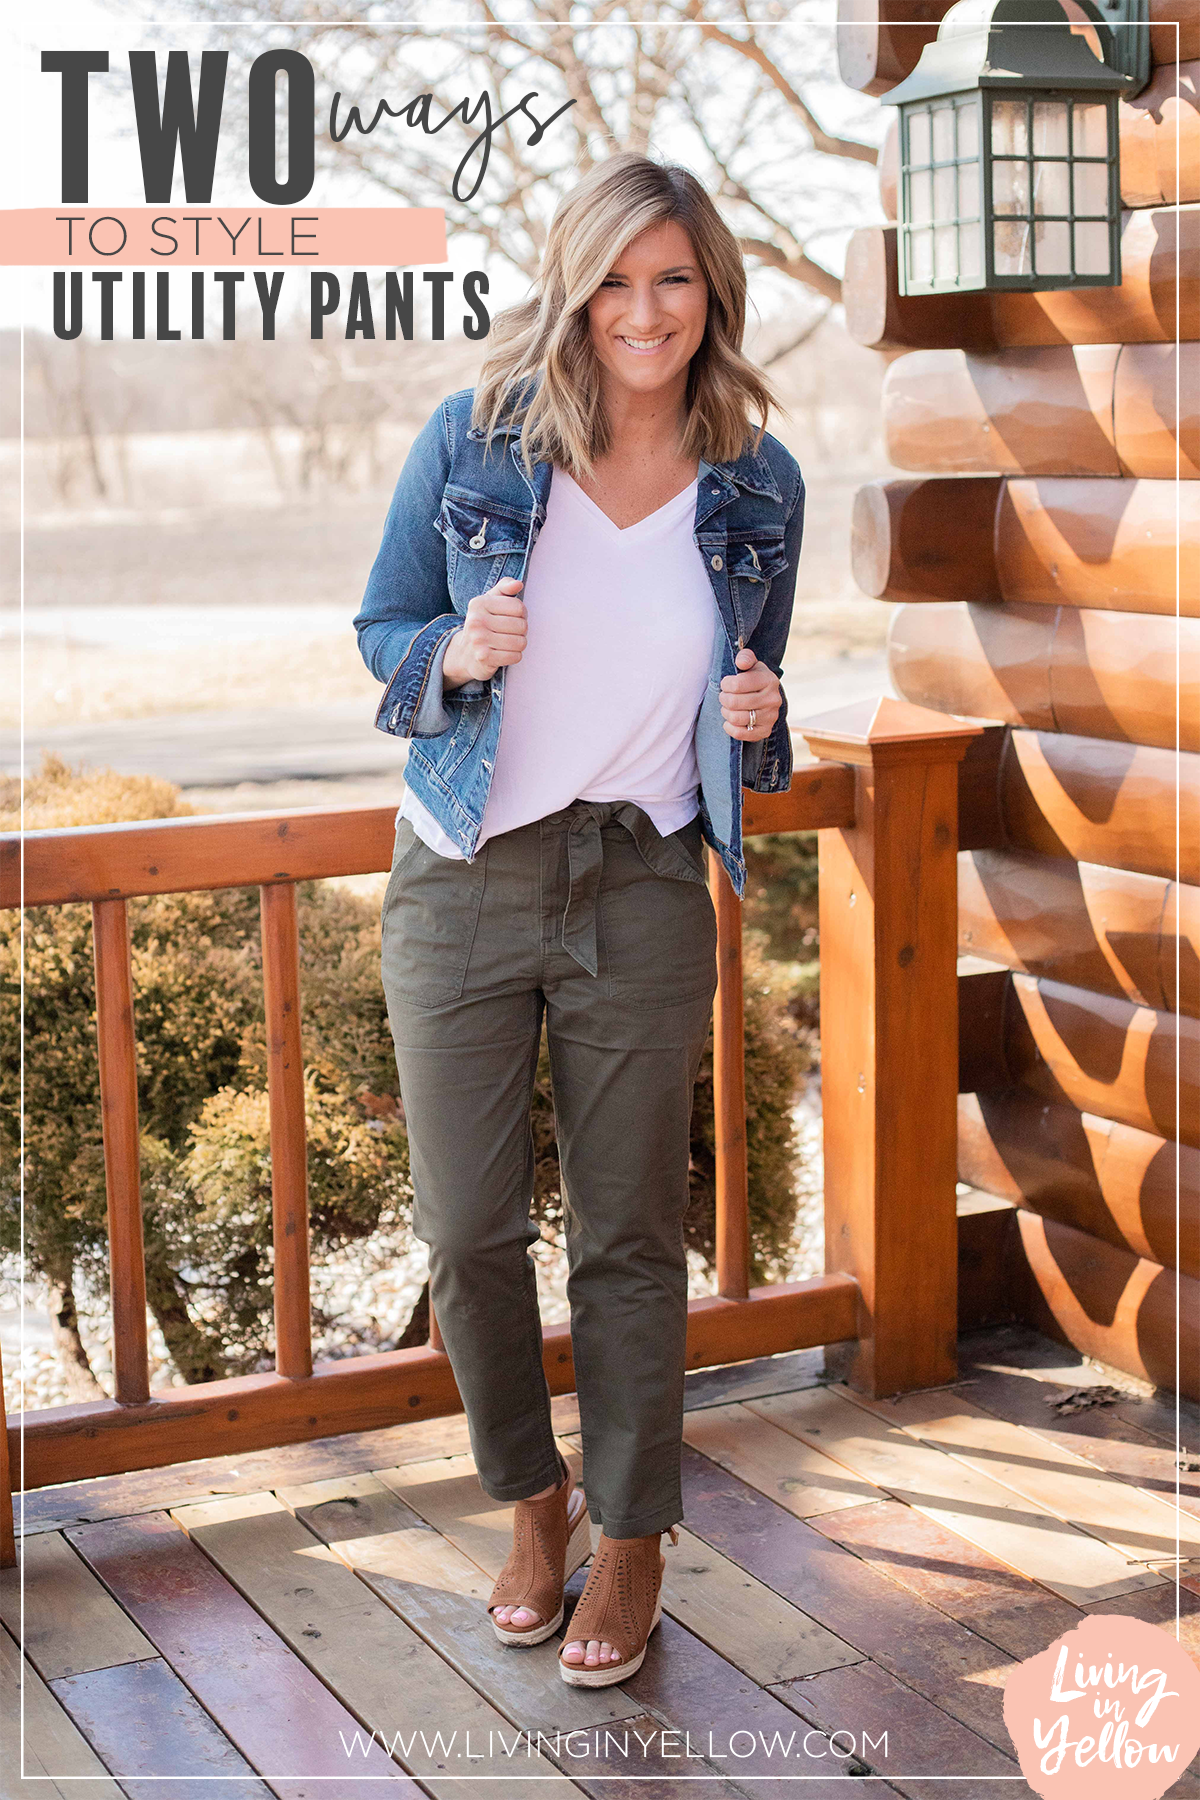 How_to-wear-utility-pants, two-ways-to-style-utility-pants